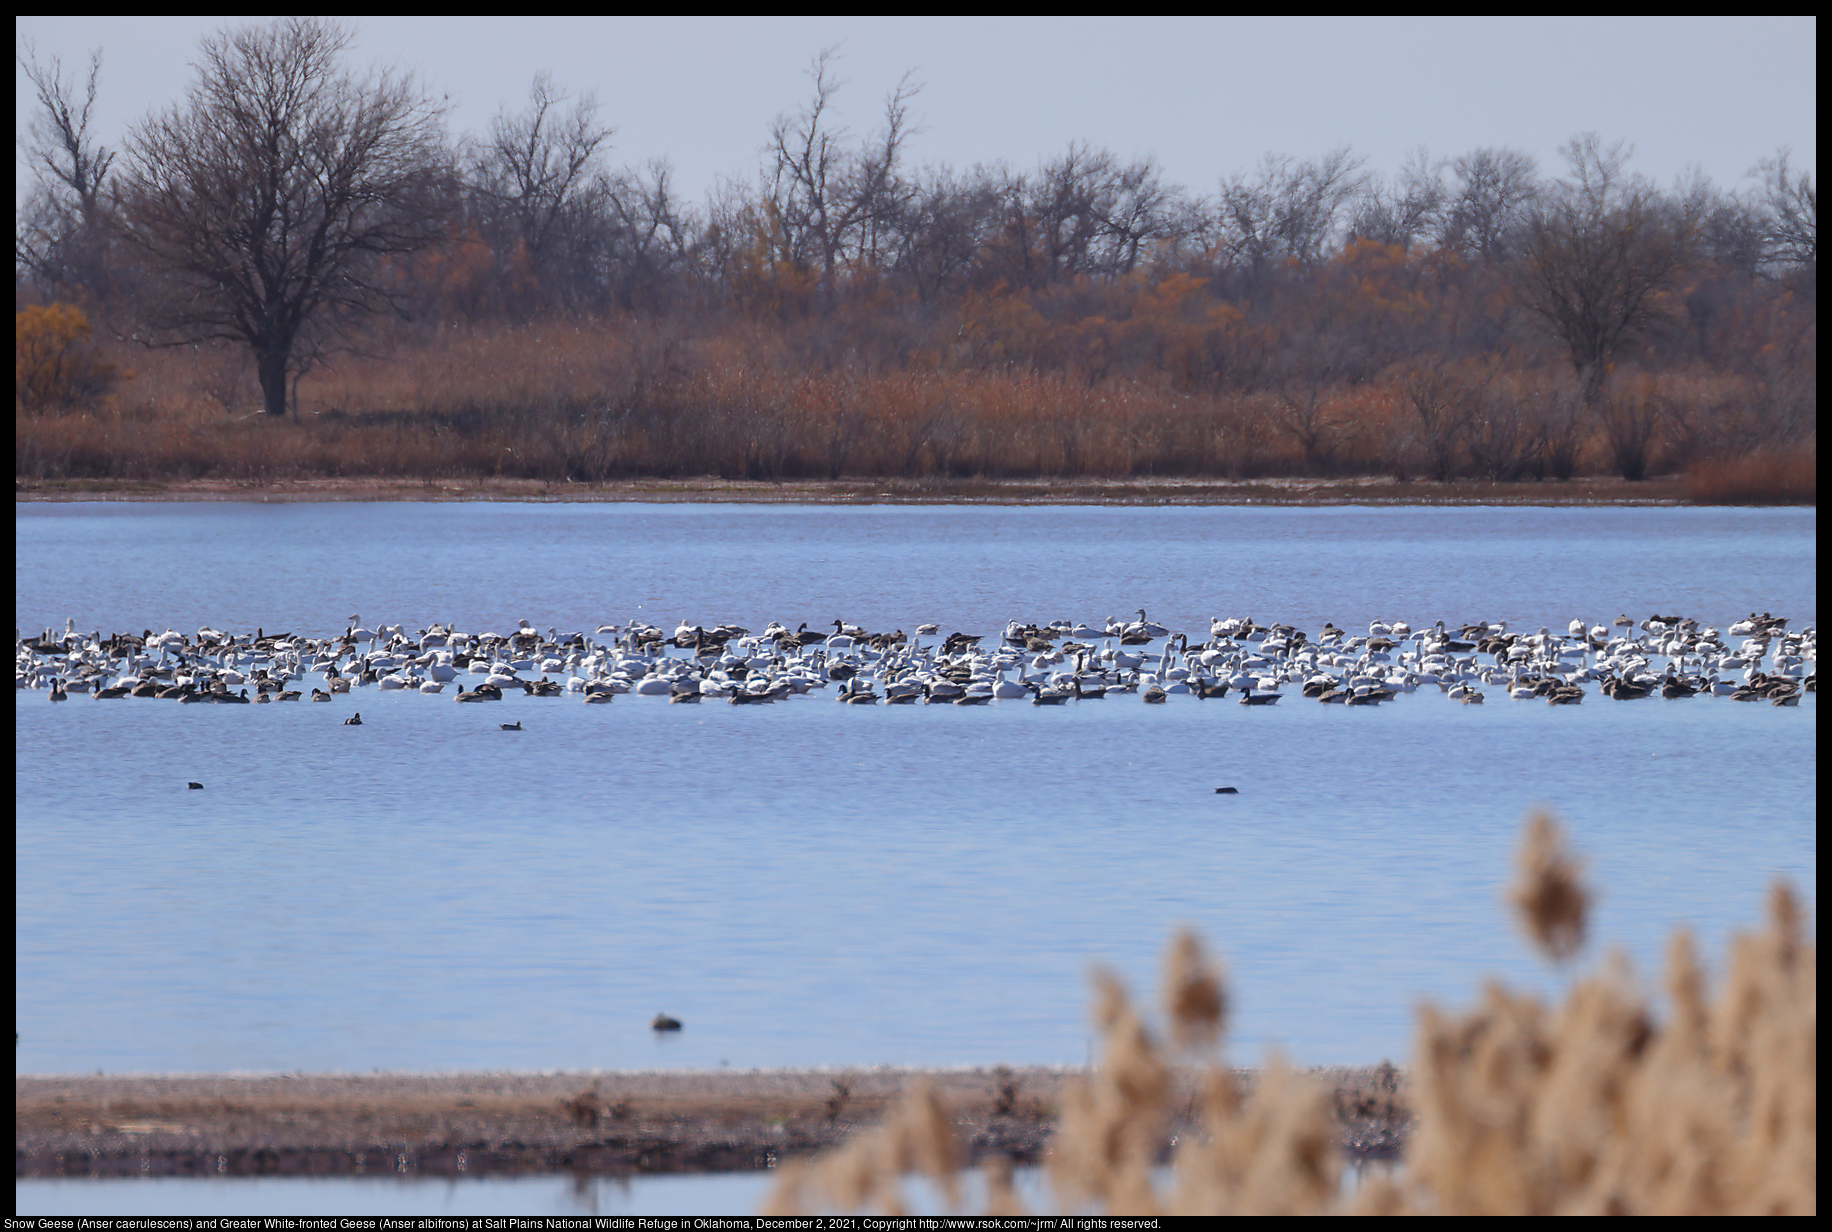 Snow Geese (Anser caerulescens) and Greater White-fronted Geese (Anser albifrons) at Salt Plains National Wildlife Refuge in Oklahoma, December 2, 2021